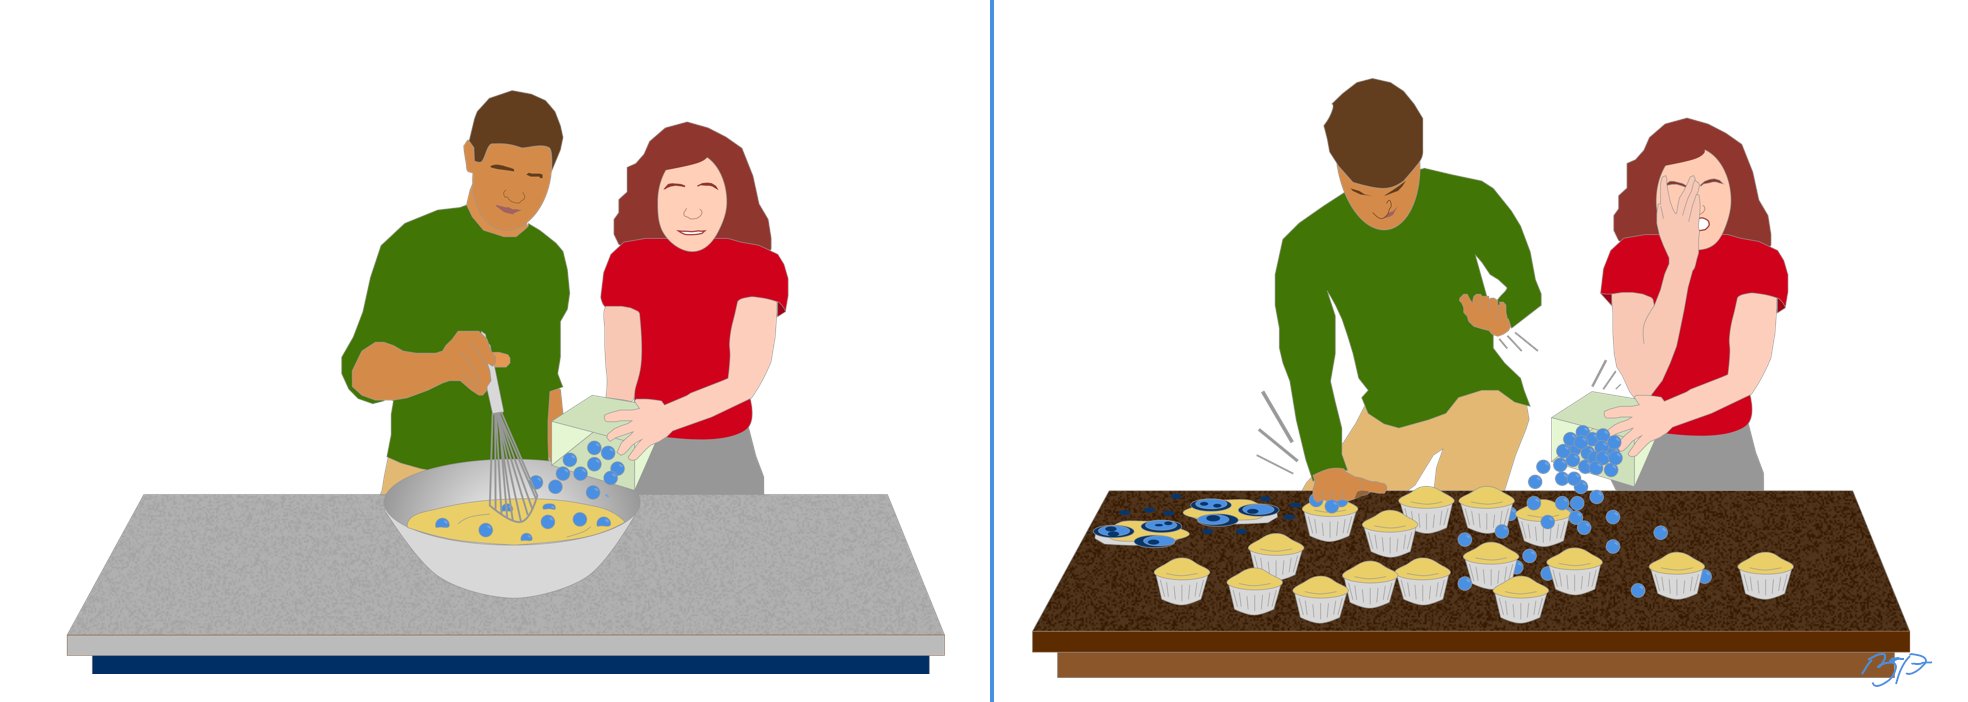 Two panels. On the left, two people bake blueberry muffins, pouring blueberries into the batter as they stir. On the right, the muffins are out of the oven with no blueberries, and the two people attempt to mash blueberries into them, crying, while the muffins explode.